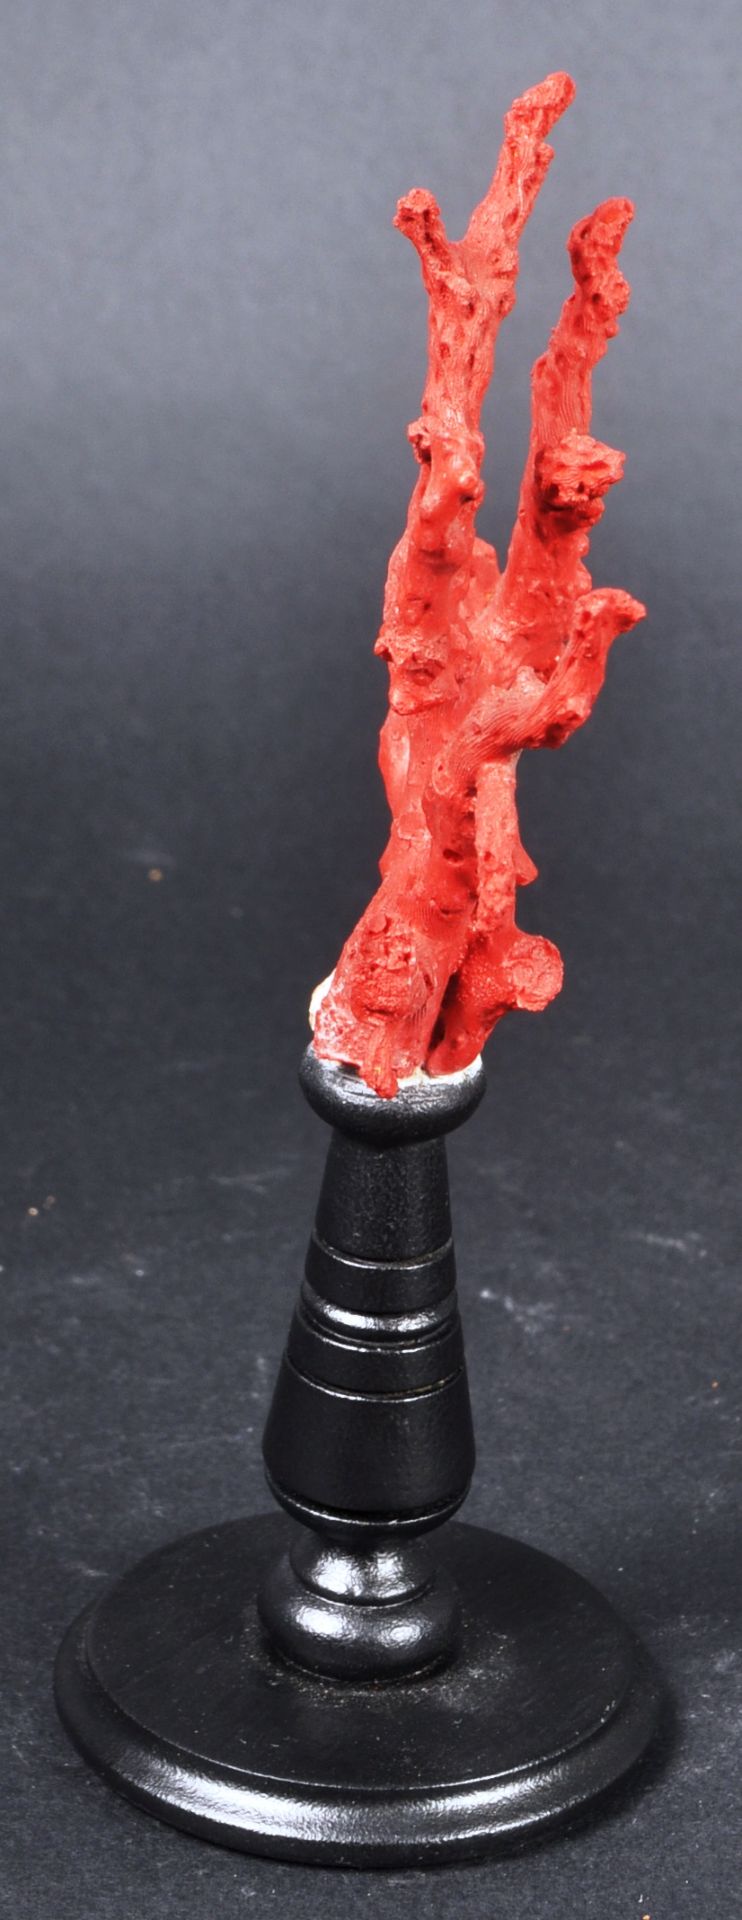 NATURAL HISTORY & TAXIDERMY - SICILIAN RED CORAL BRANCH - Image 5 of 6